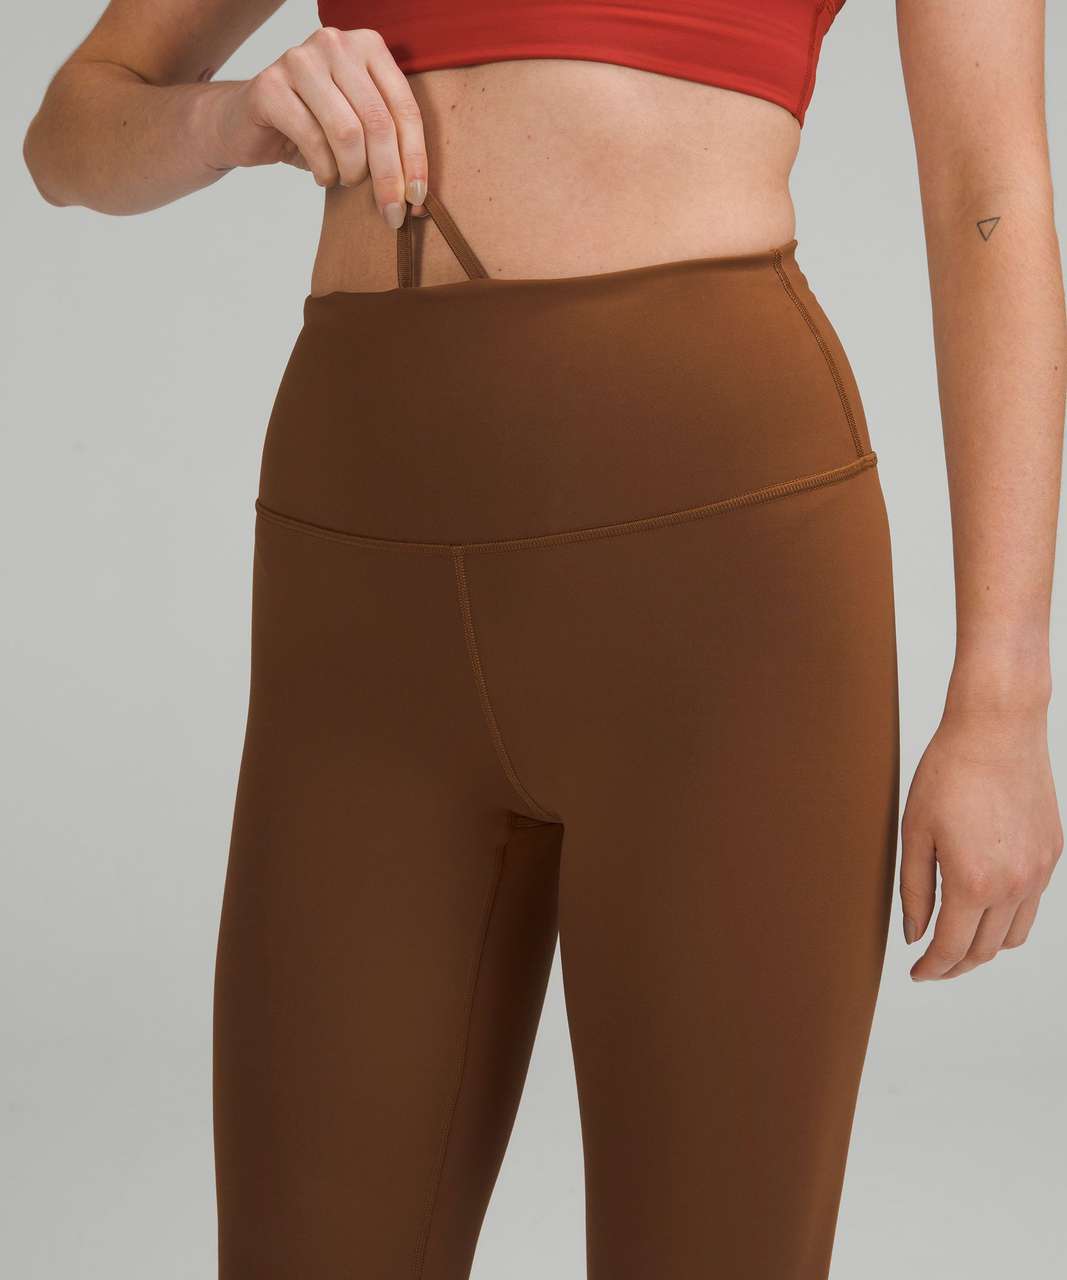 Lululemon Wunder Train High-Rise Tight 25 Size 10 Date Brown DTBN 76448